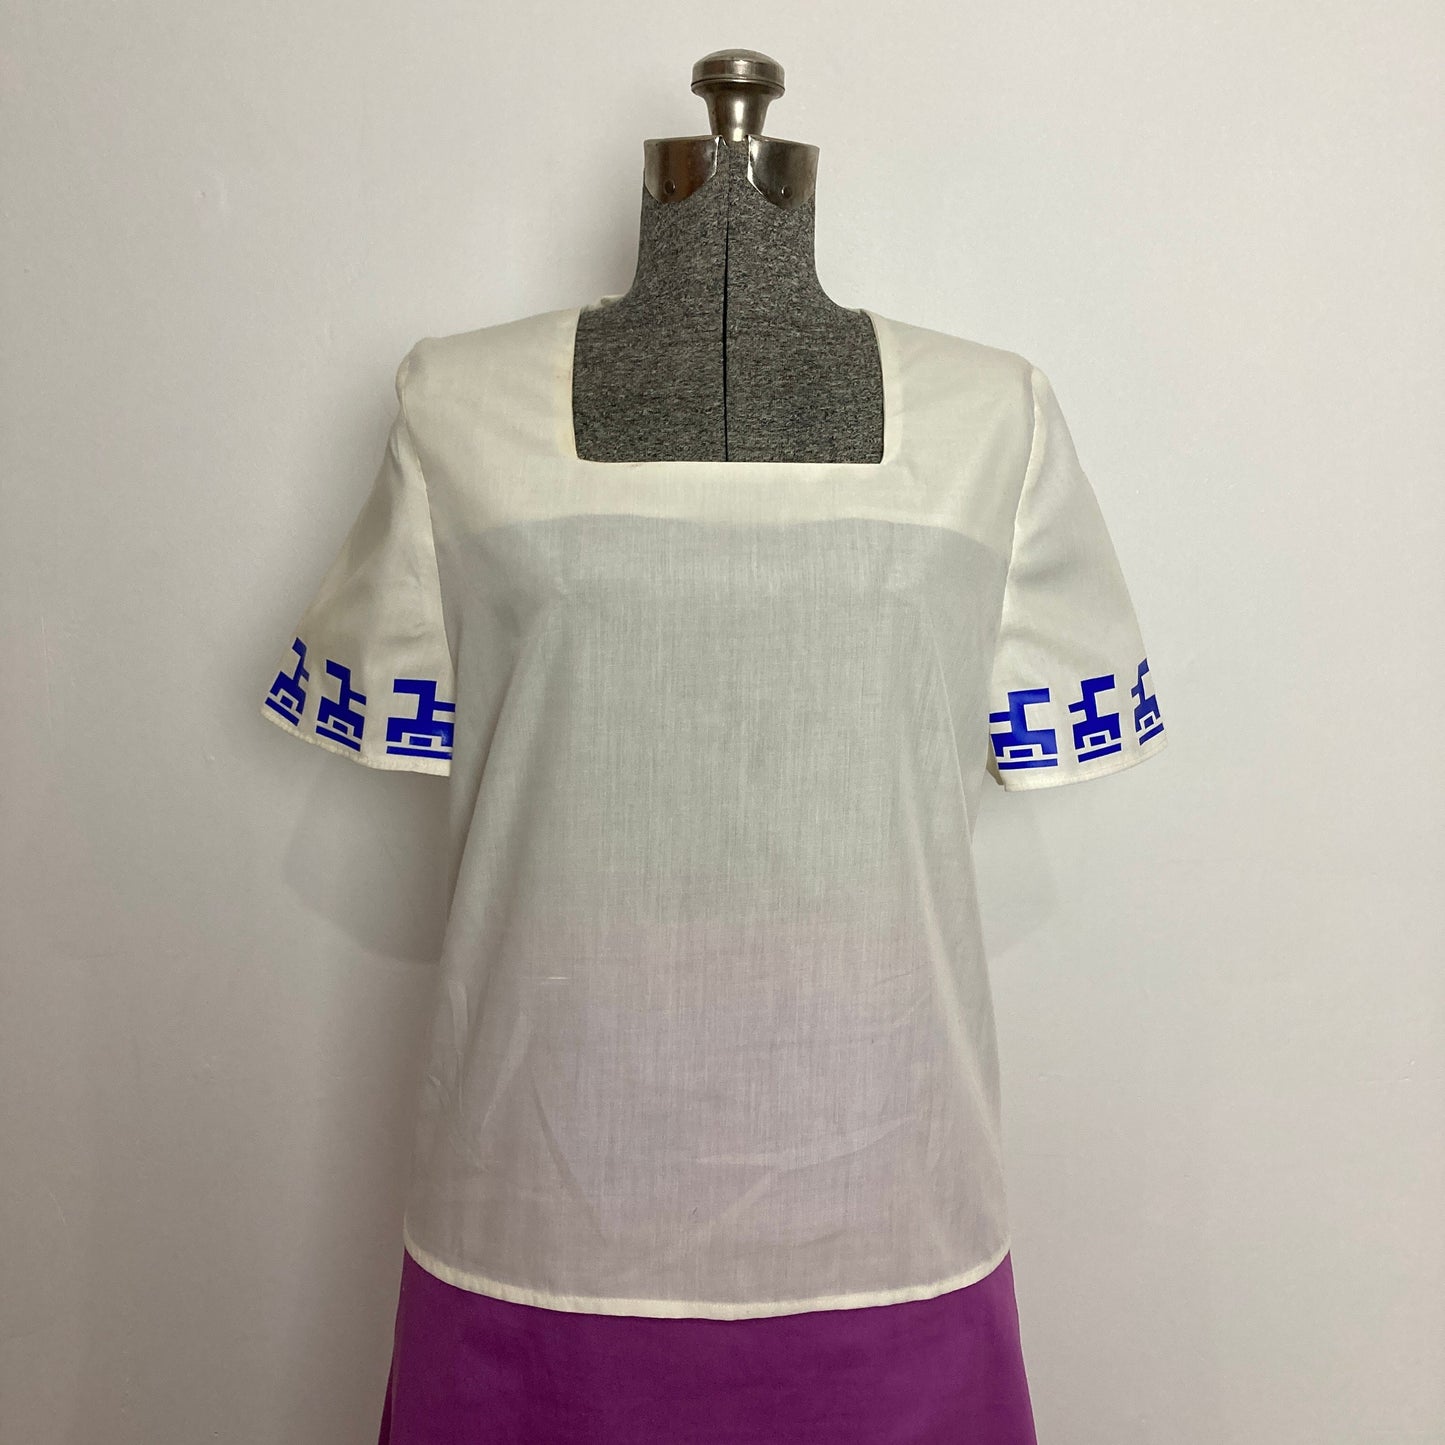 Simple Square Neckline Shirt Sewing Pattern/Downloadable PDF File and Tutorial Book